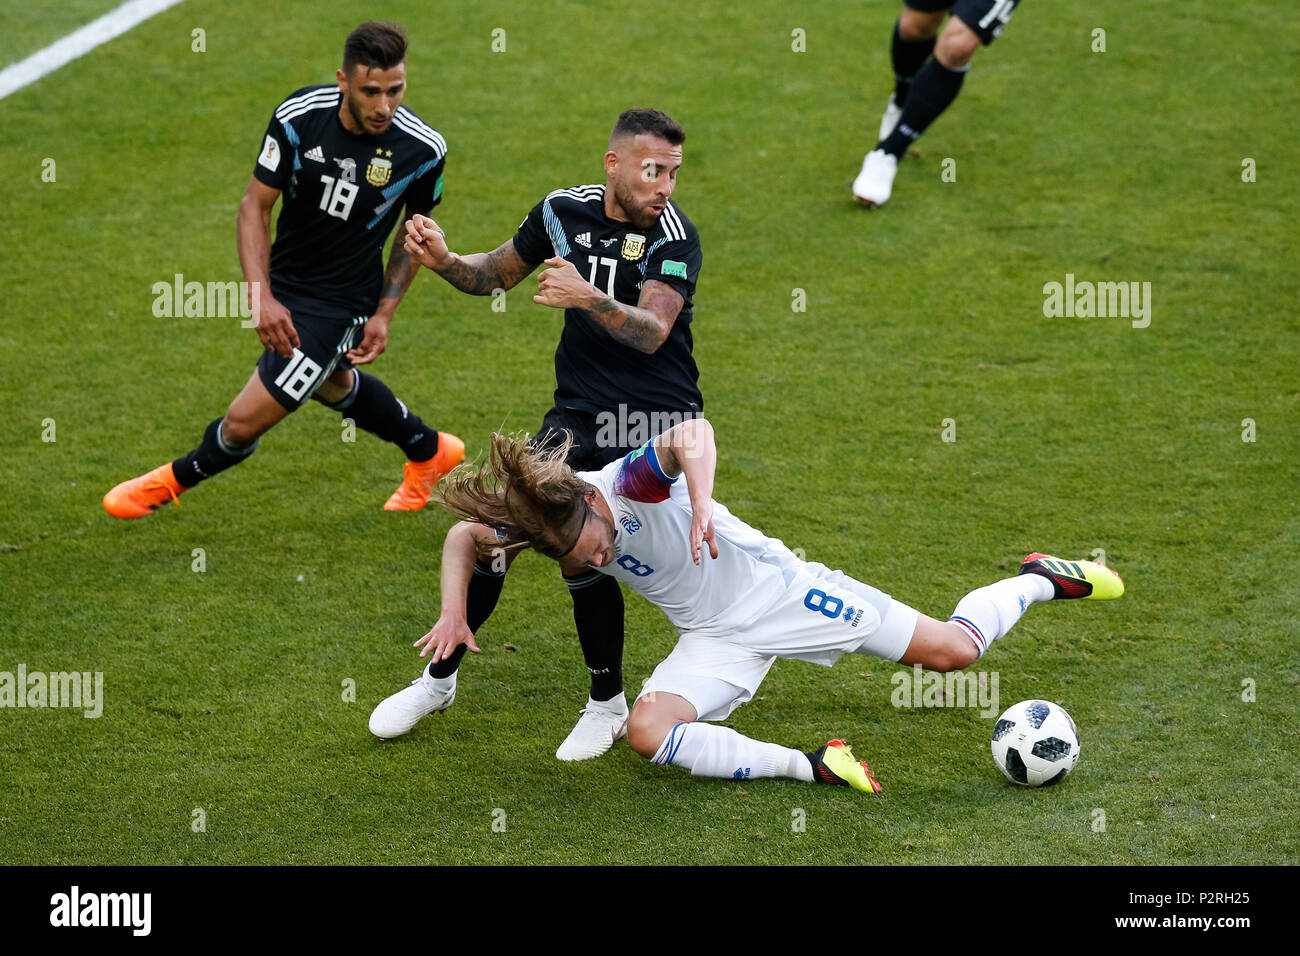 Moscow, Russia. 16th Jun, 2018. Birkir Bjarnason of Iceland is tackled by Nicolas Otamendi of Argentina and Eduardo Salvio of Argentina during the 2018 FIFA World Cup Group D match between Argentina and Iceland at Spartak Stadium on June 16th 2018 in Moscow, Russia. (Photo by Daniel Chesterton/phcimages.com) Credit: PHC Images/Alamy Live News Stock Photo